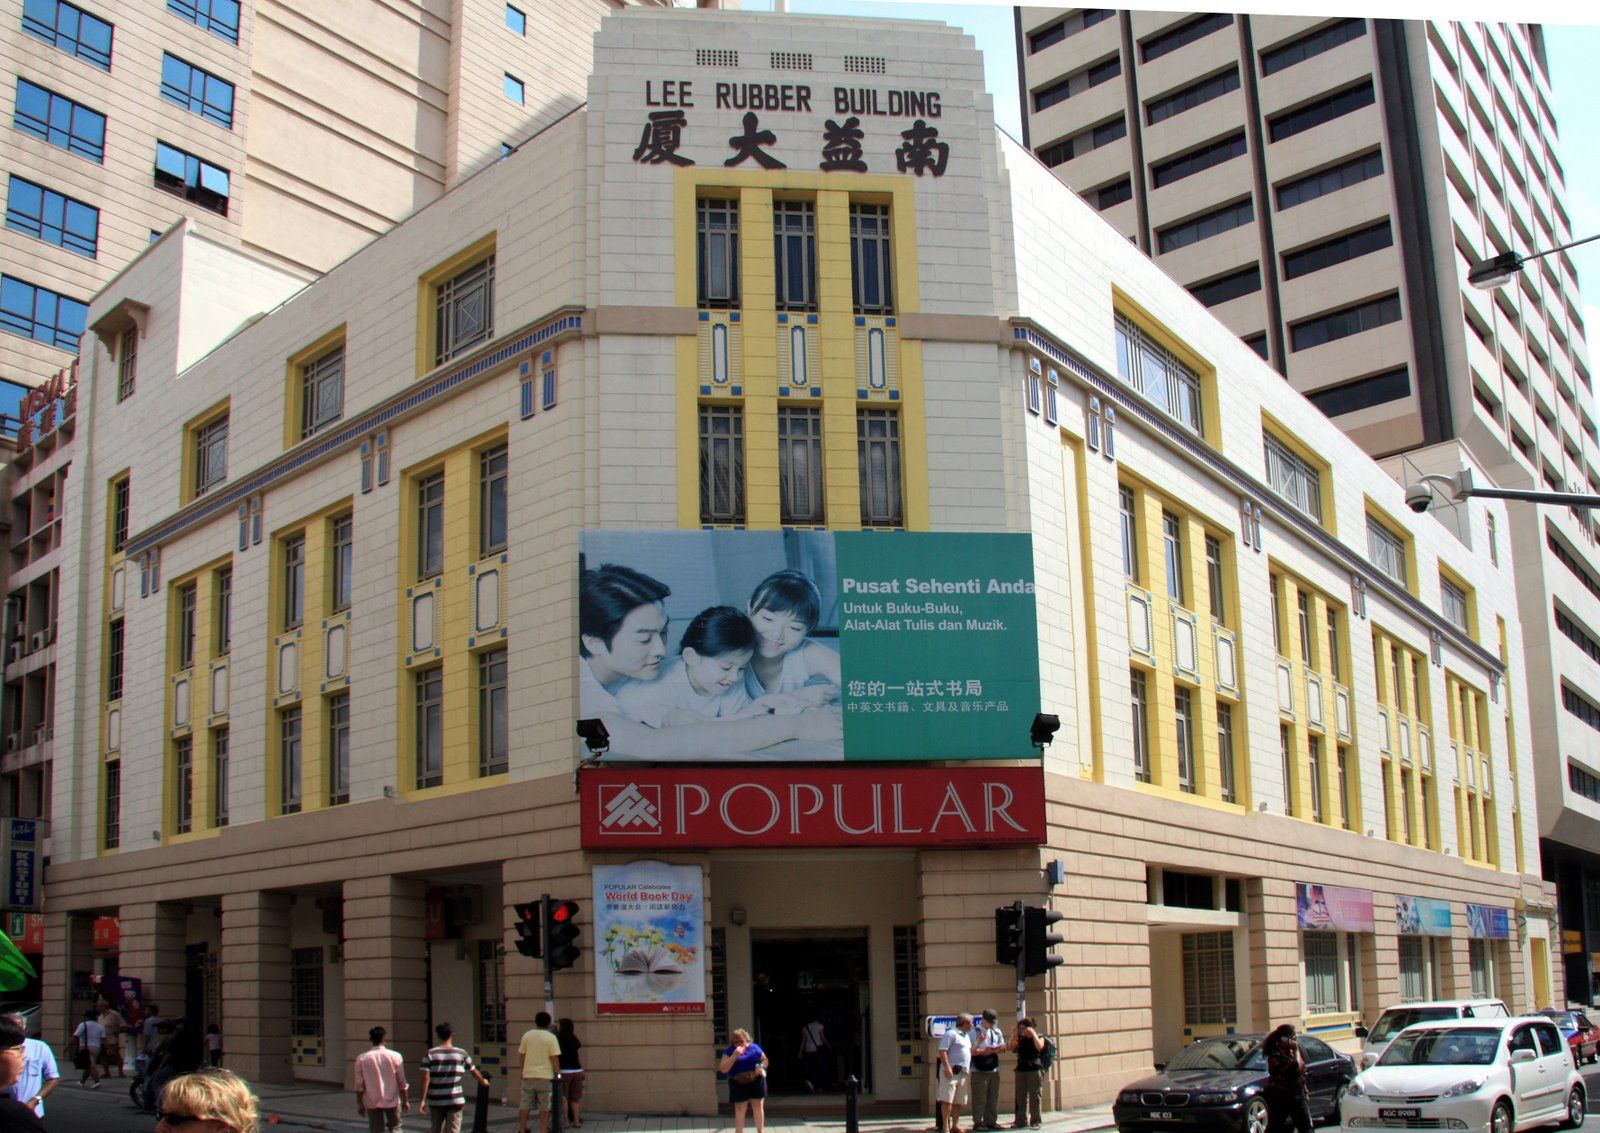 The Kempeitai headquarters was located here at the Lee Rubber building along Jalan Tun H S Lee in KL. Image from Pinterest 